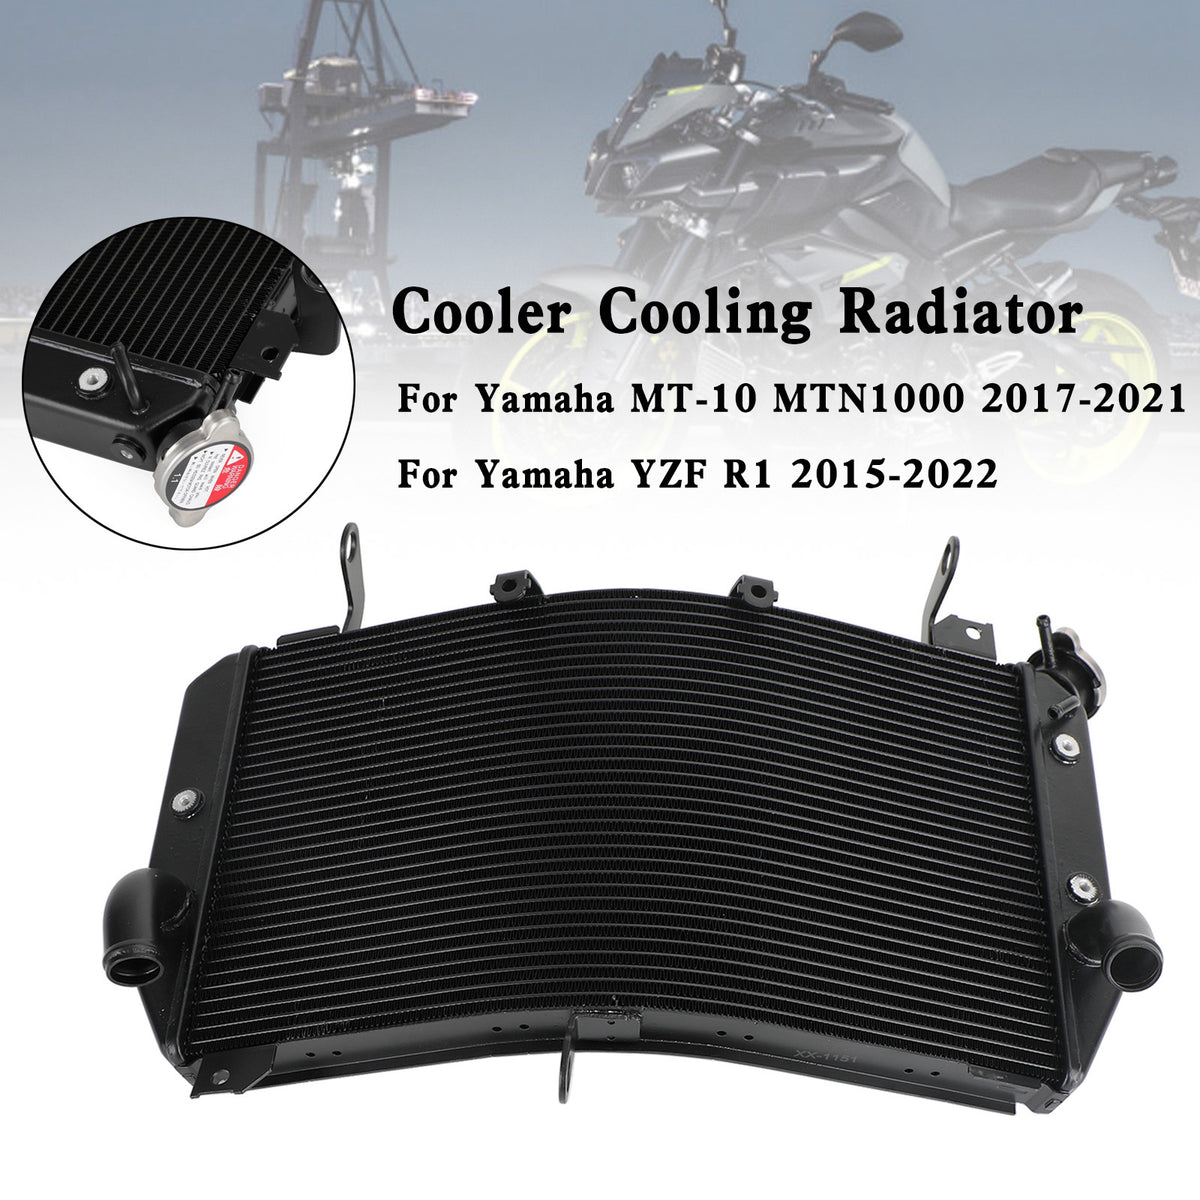 Radiator Cooling Cooler For Yamaha FZ10 MT-10 MTN1000 2016-2021 YZF-R1 15-22 Generic